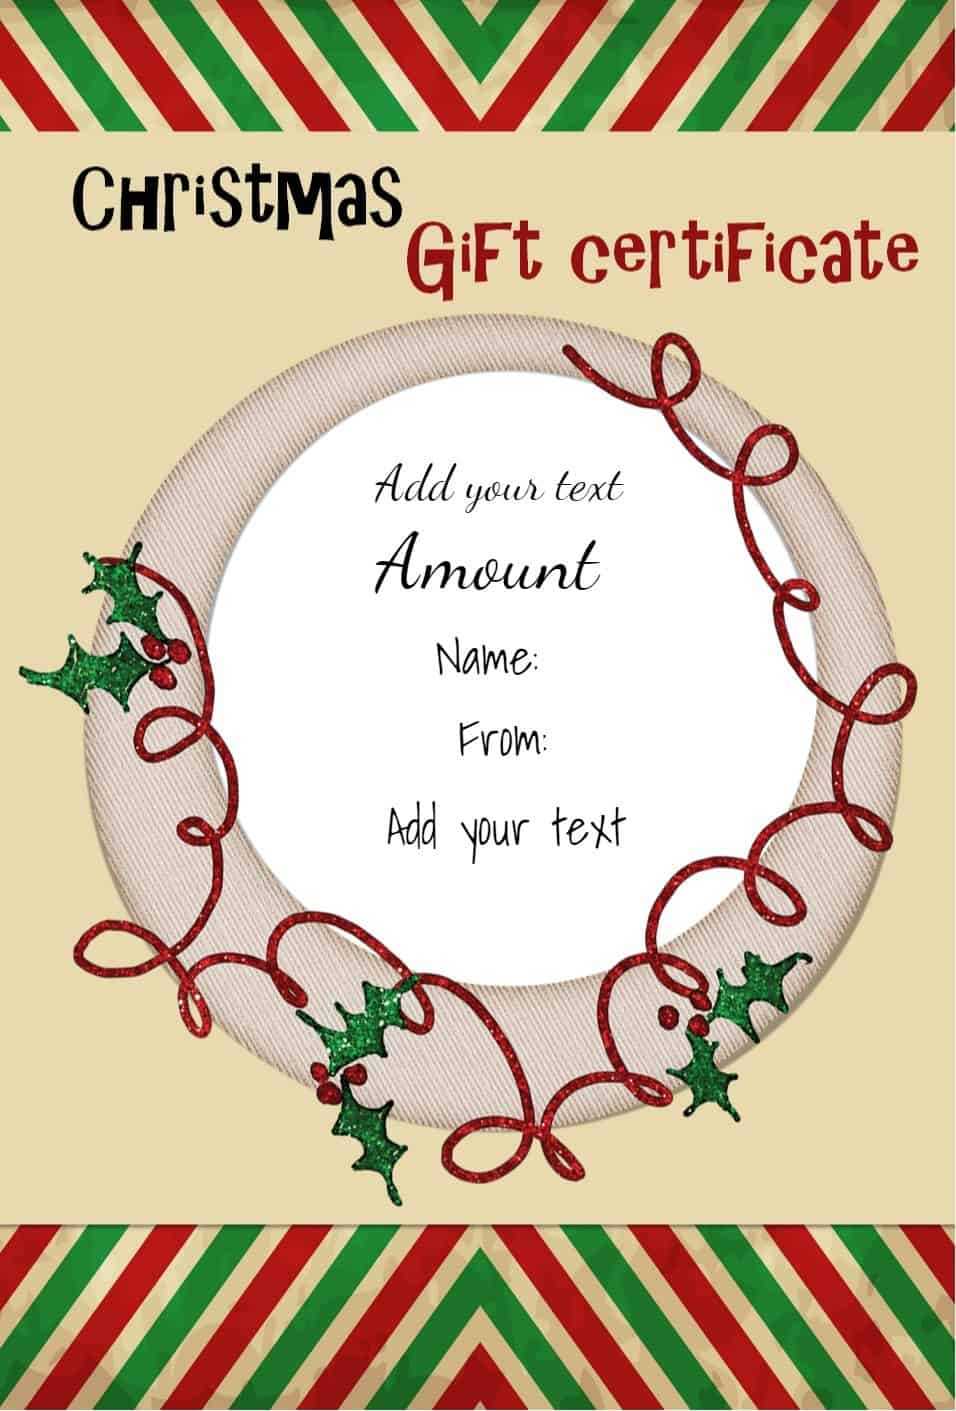 Free Christmas Gift Certificate Template | Customize Online In Free Christmas Gift Certificate Templates